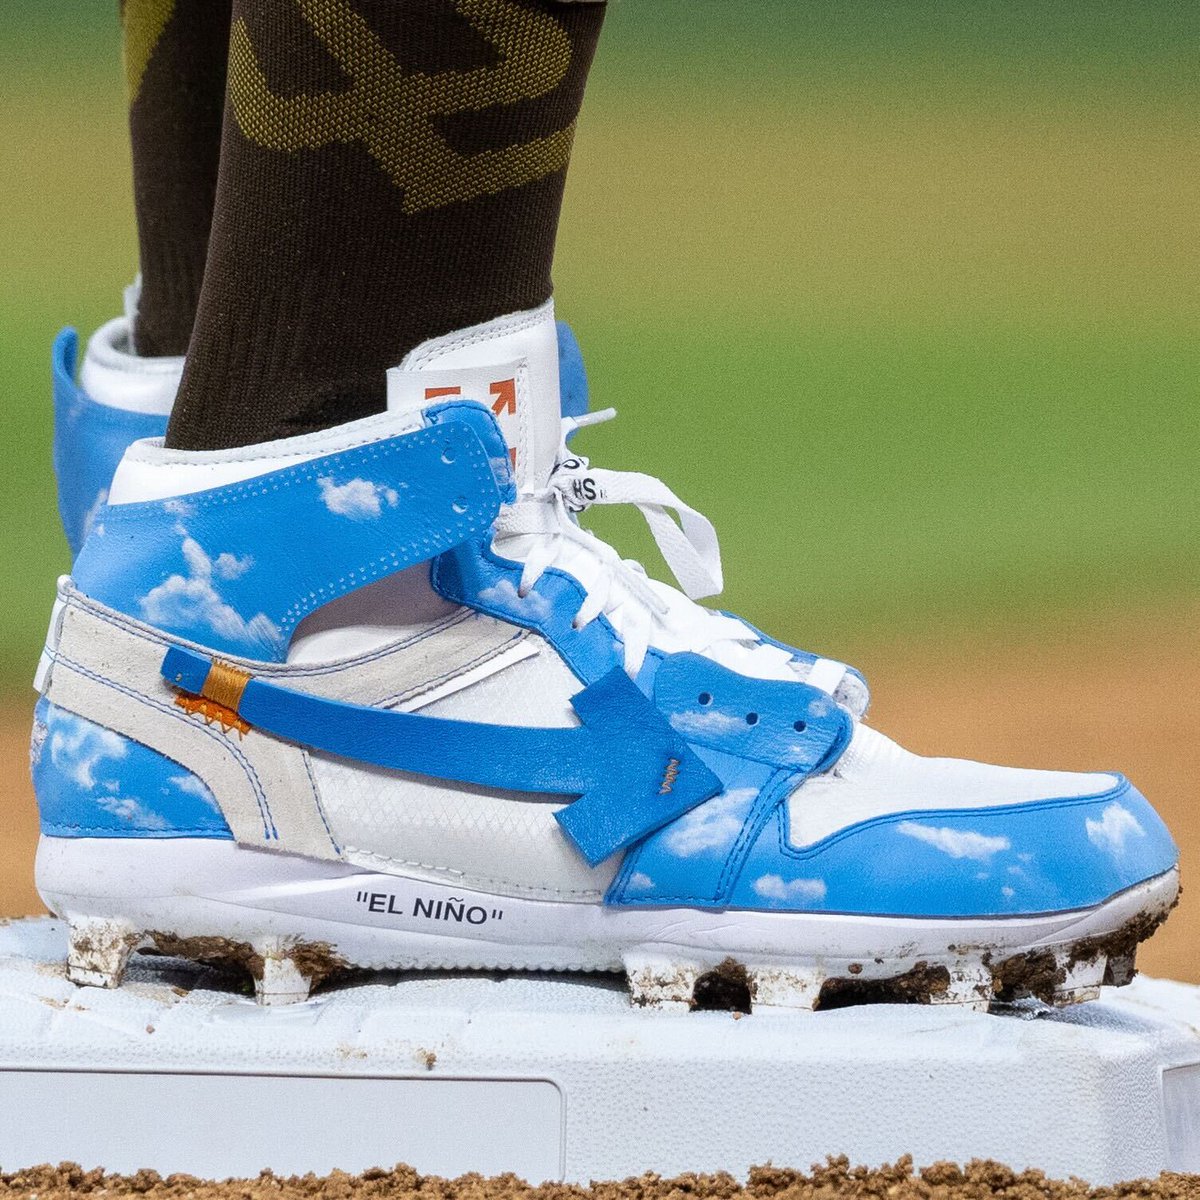 Fernando Tatis Jr. added to his unmatched custom cleat run tonight with Off-White 'Cloudy Sky' Jordan 1s 🌤️